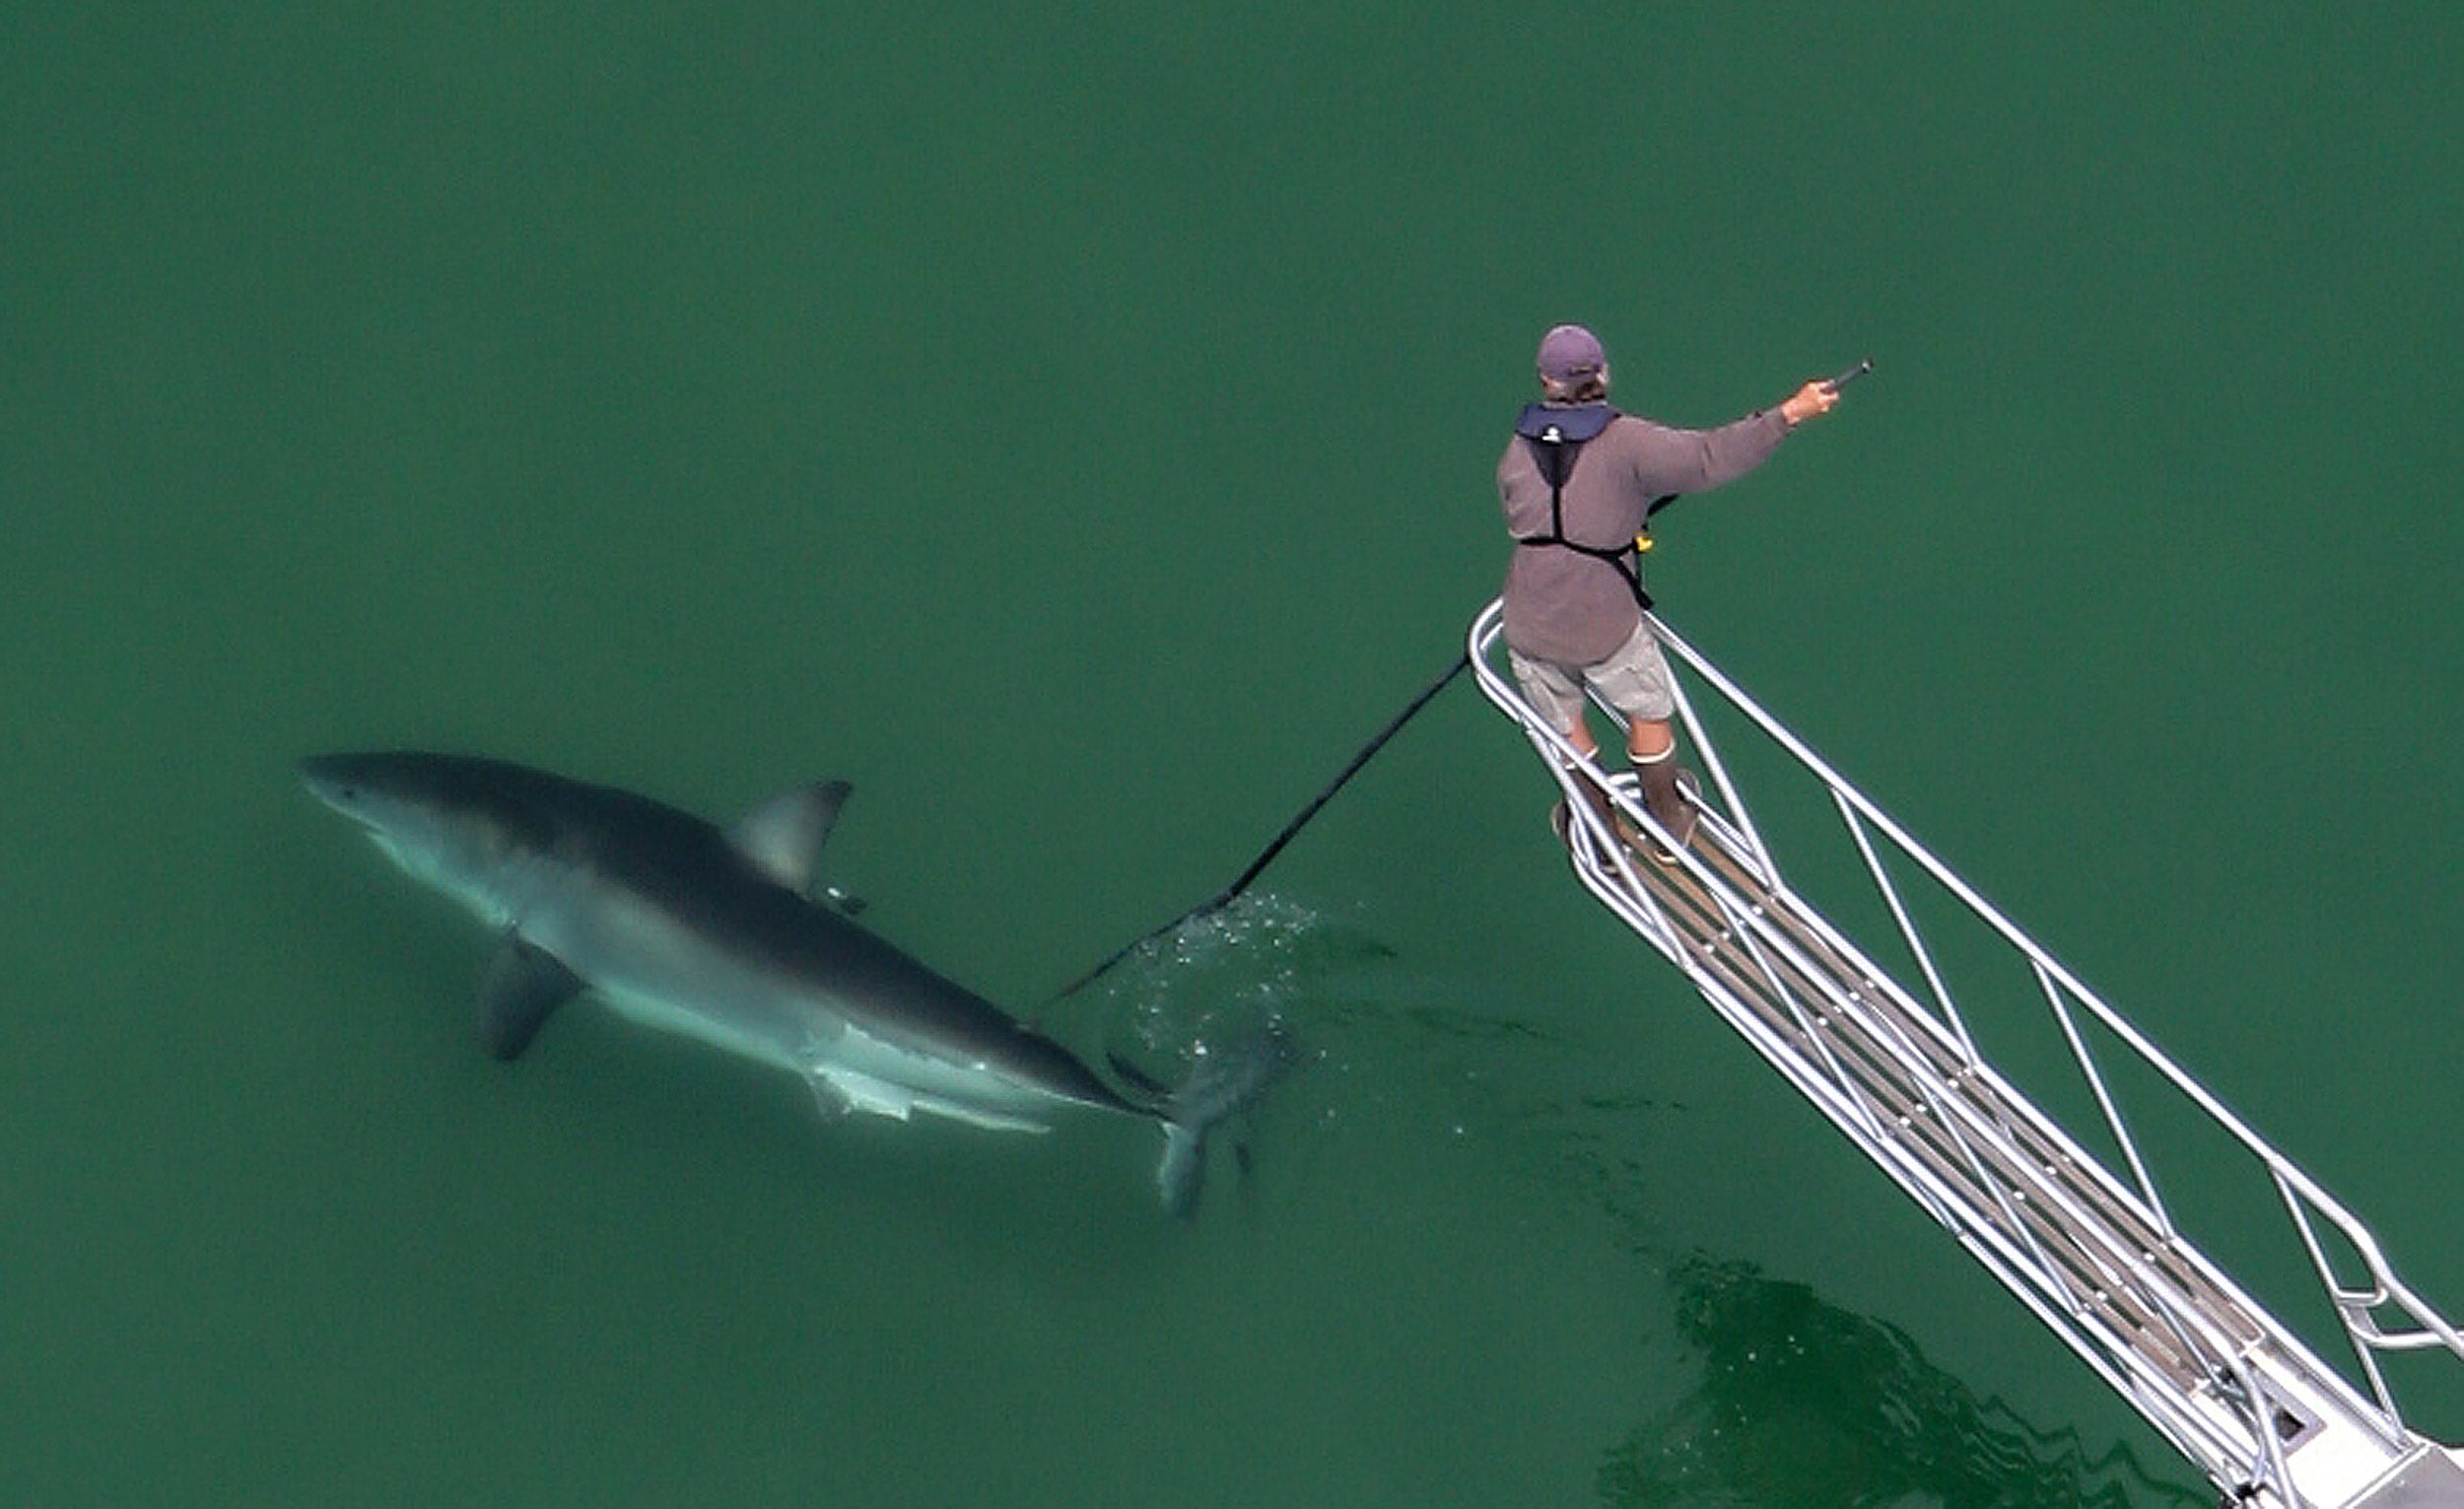 Greg Skomal tags a great white shark in the waters off Cape Cod.